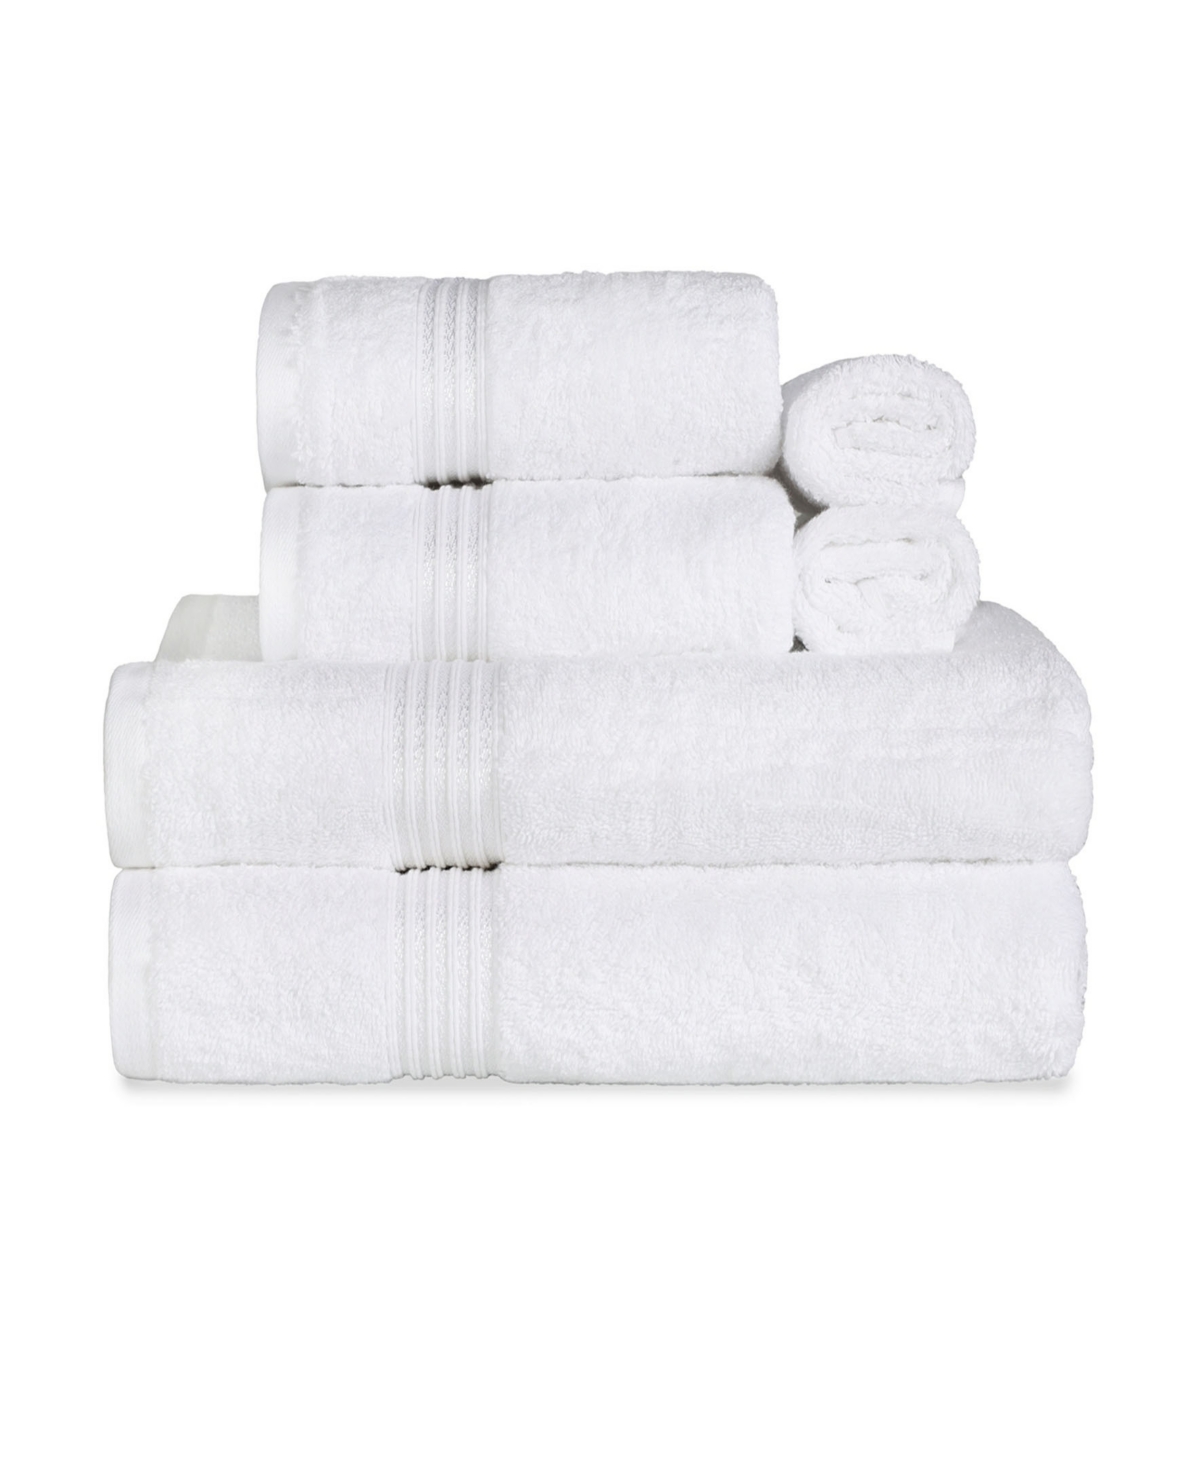 Superior Solid Quick Drying Absorbent 6 Piece Egyptian Cotton Assorted Towel Set Bedding In White